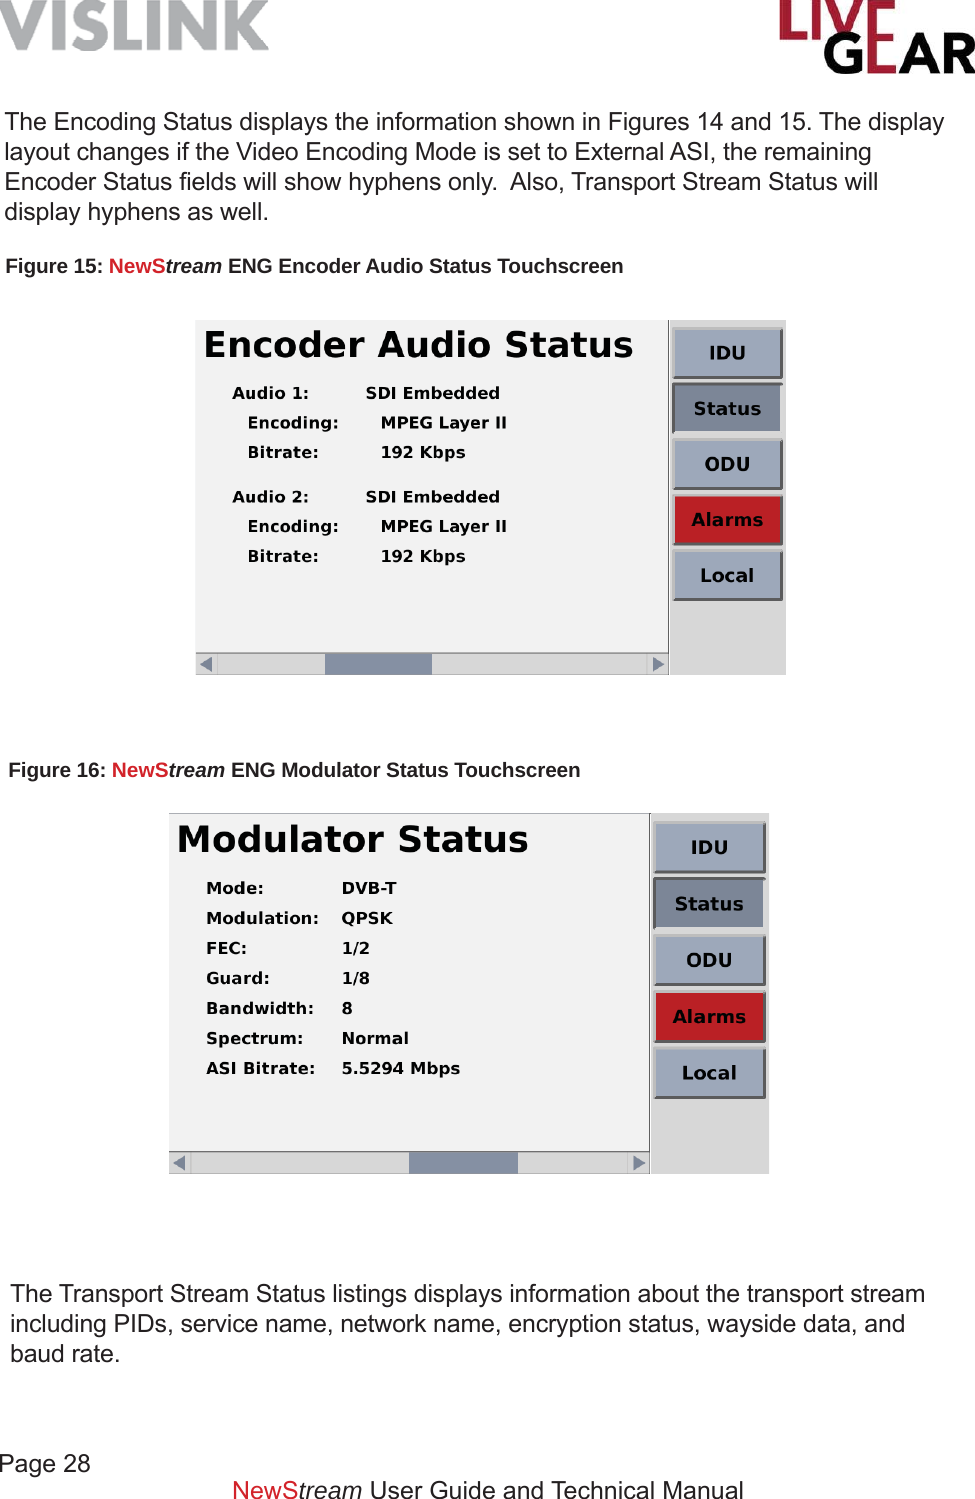 Page 28         NewStream User Guide and Technical ManualFigure 15: NewStream ENG Encoder Audio Status Touchscreen The Encoding Status displays the information shown in Figures 14 and 15. The display layout changes if the Video Encoding Mode is set to External ASI, the remaining Encoder Status ﬁ elds will show hyphens only.  Also, Transport Stream Status will display hyphens as well.Figure 16: NewStream ENG Modulator Status Touchscreen The Transport Stream Status listings displays information about the transport stream including PIDs, service name, network name, encryption status, wayside data, and baud rate. 